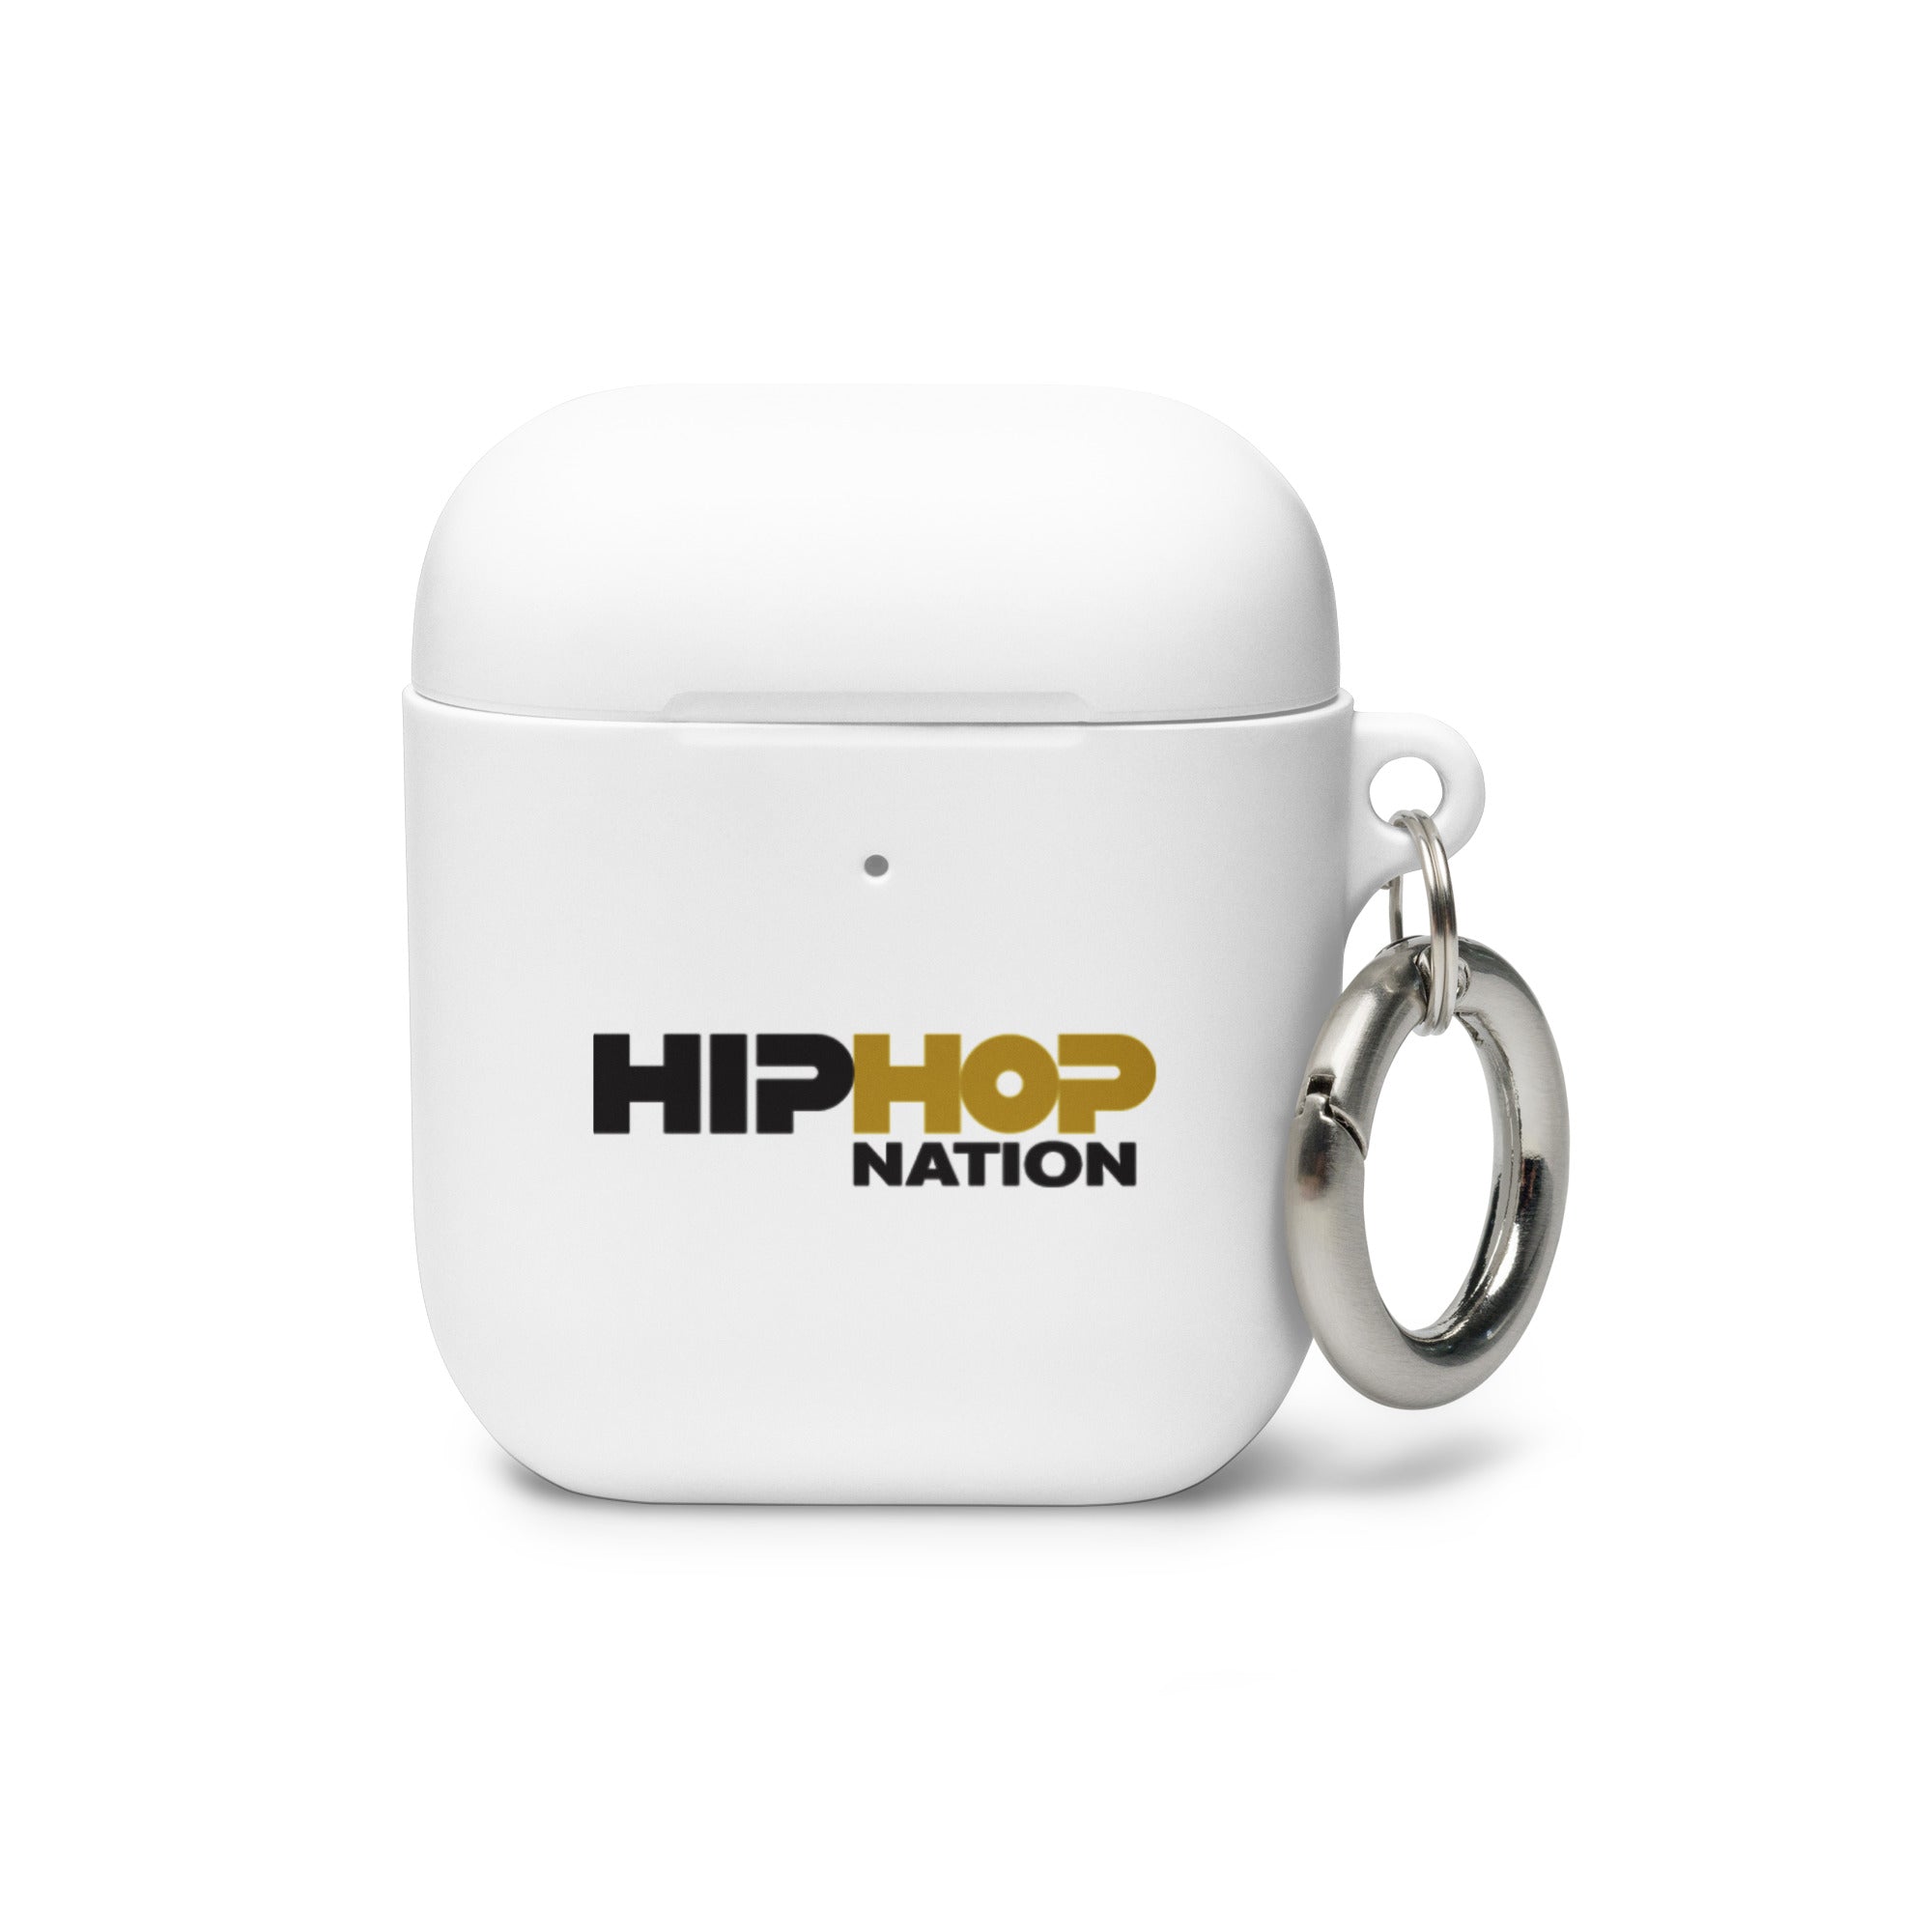 Hip-Hop Nation: AirPods® Case Cover